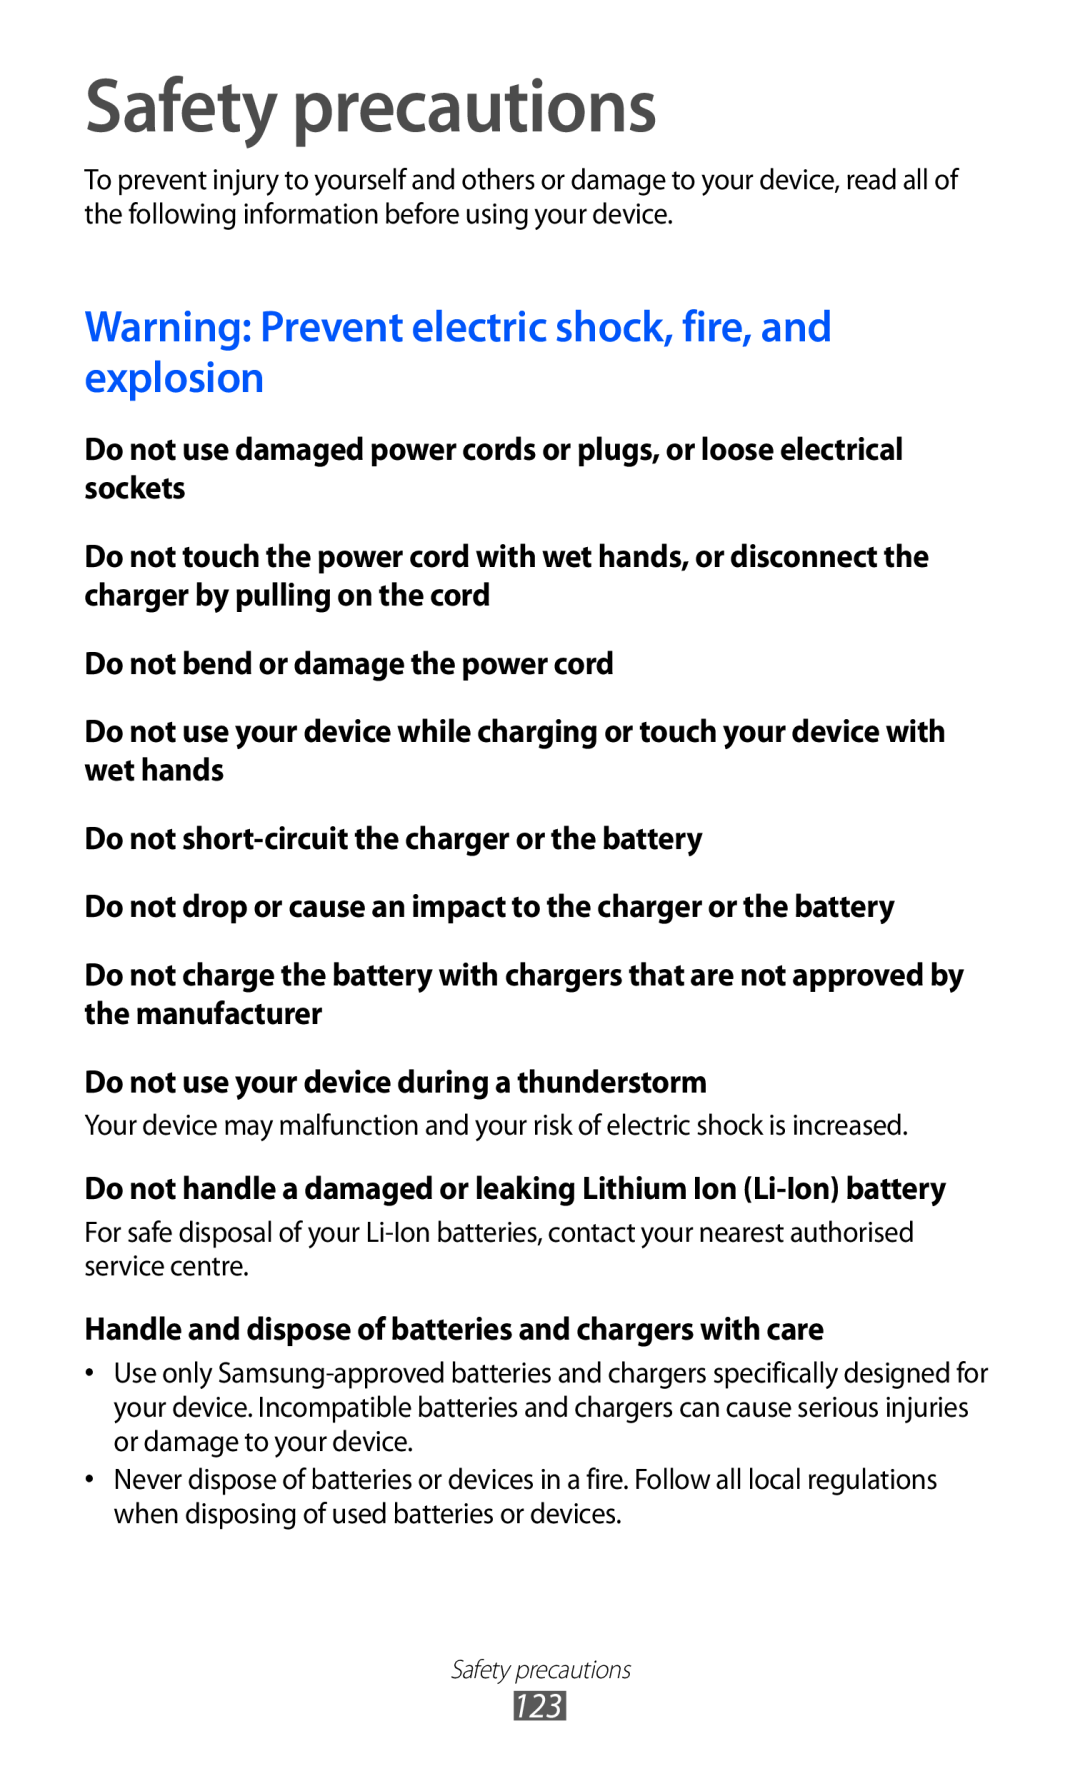 Samsung GT-S5380SSAVD2, GT-S5380SSADBT manual Safety precautions, Warning Prevent electric shock, fire, and explosion 